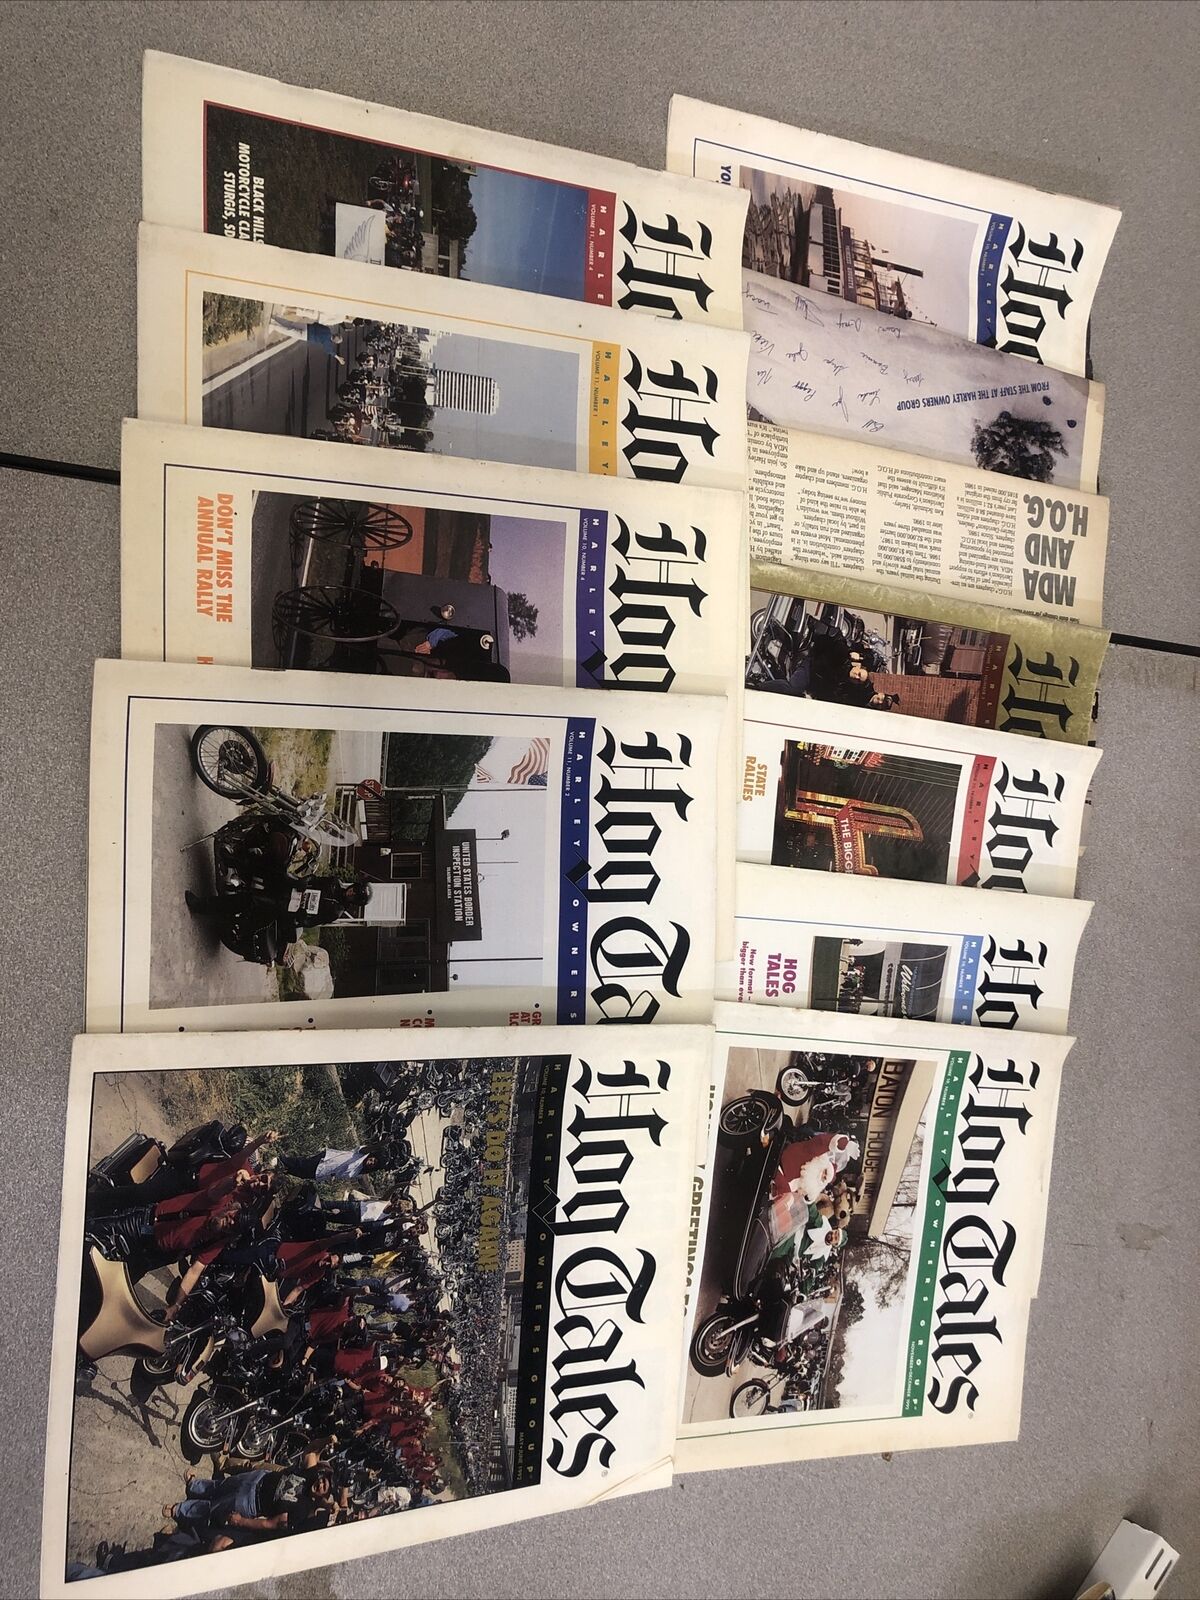 🔥Lot Of 12 Hog Tales Magazines Harley Davidson Owners Group Motorcycle 1991-93